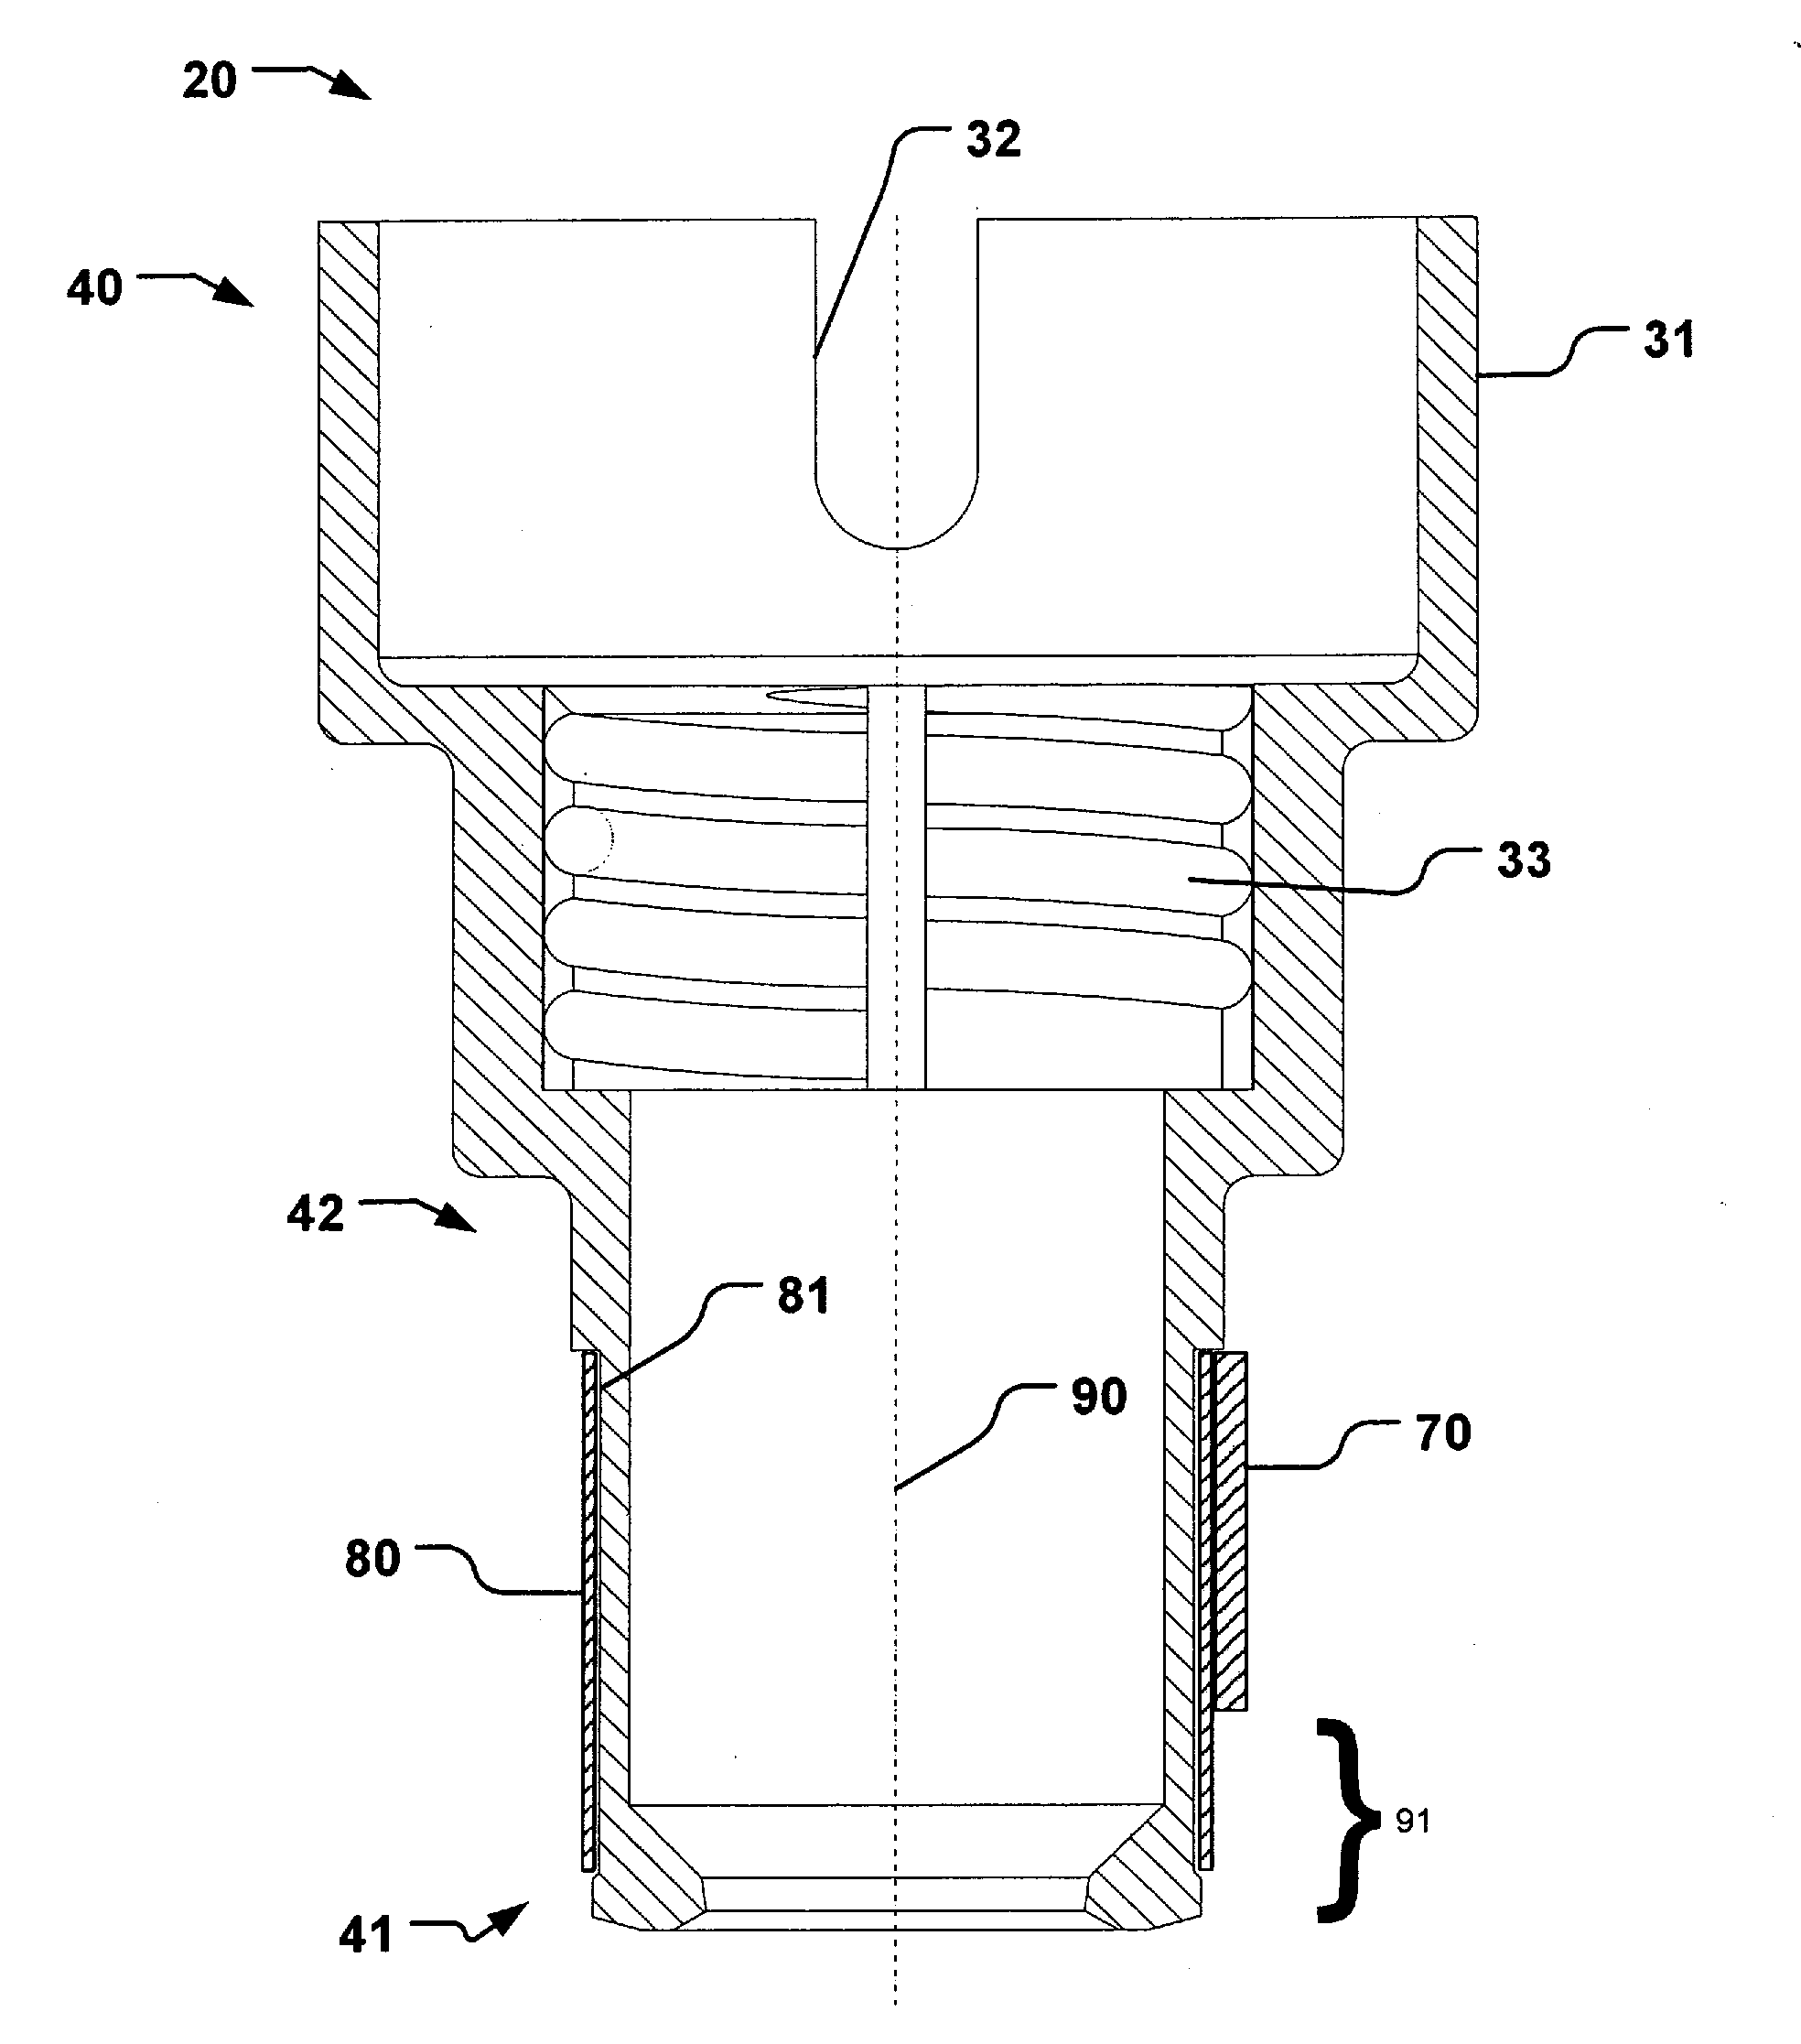 Adapter assembly for an anesthetic equipment